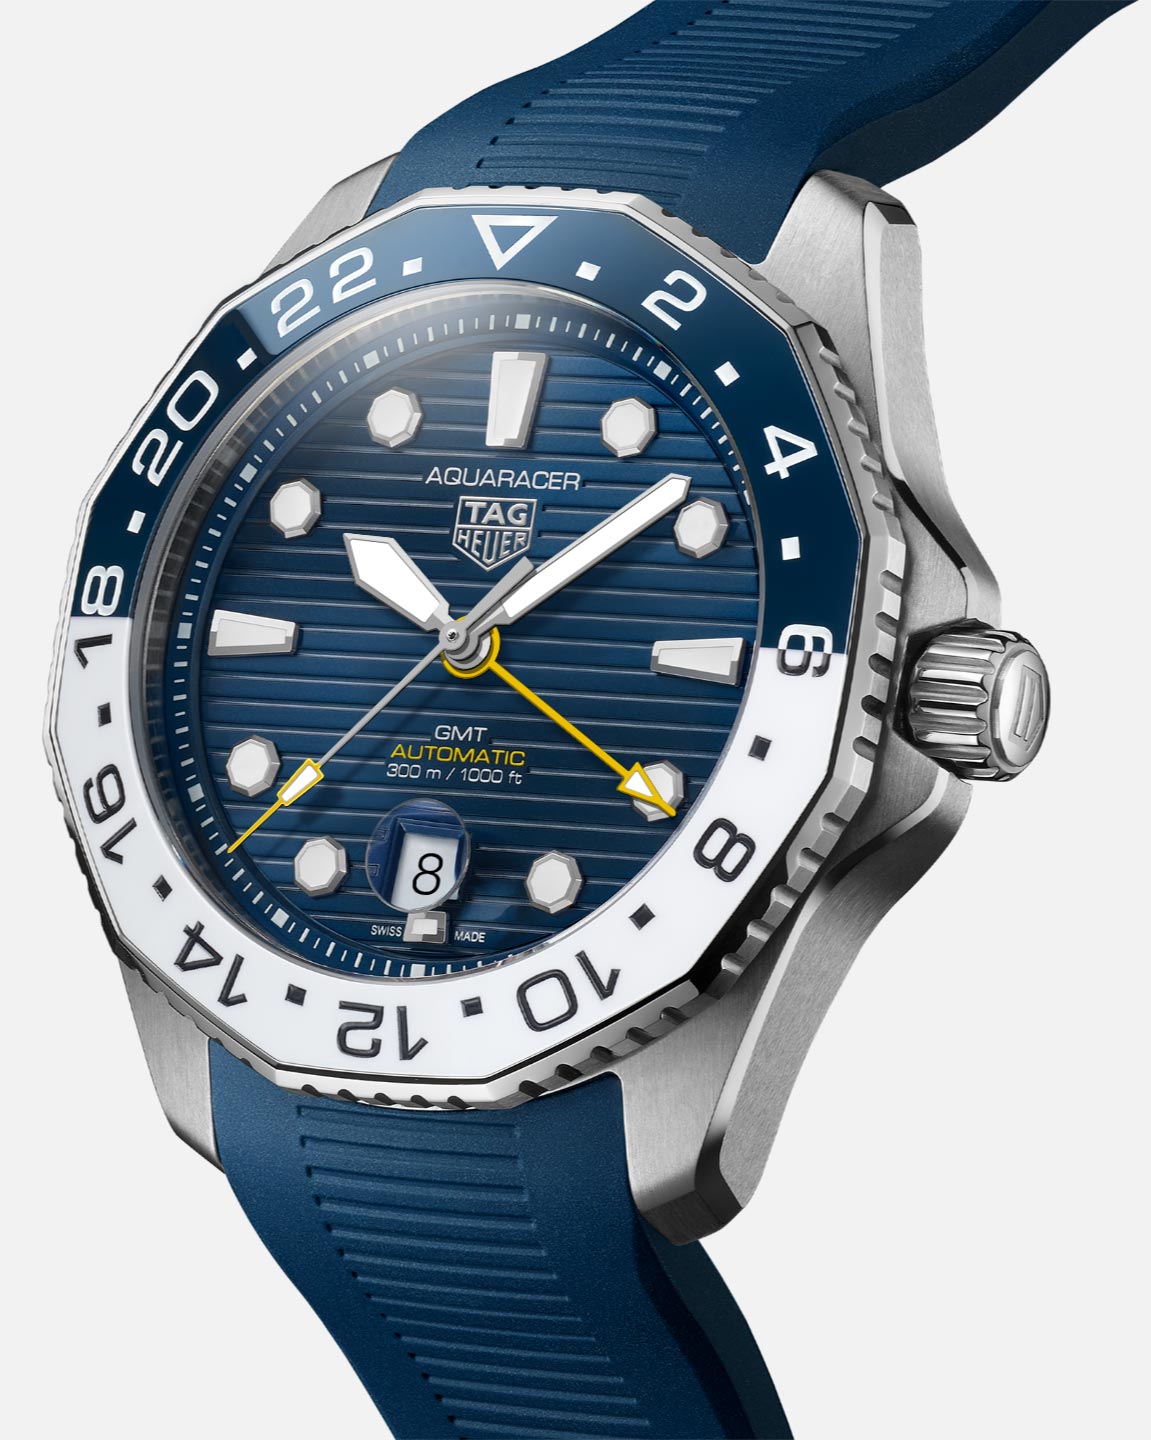 New Generation Tag Heuer Aquaracer 300 | The Watch Club by SwissWatchExpo